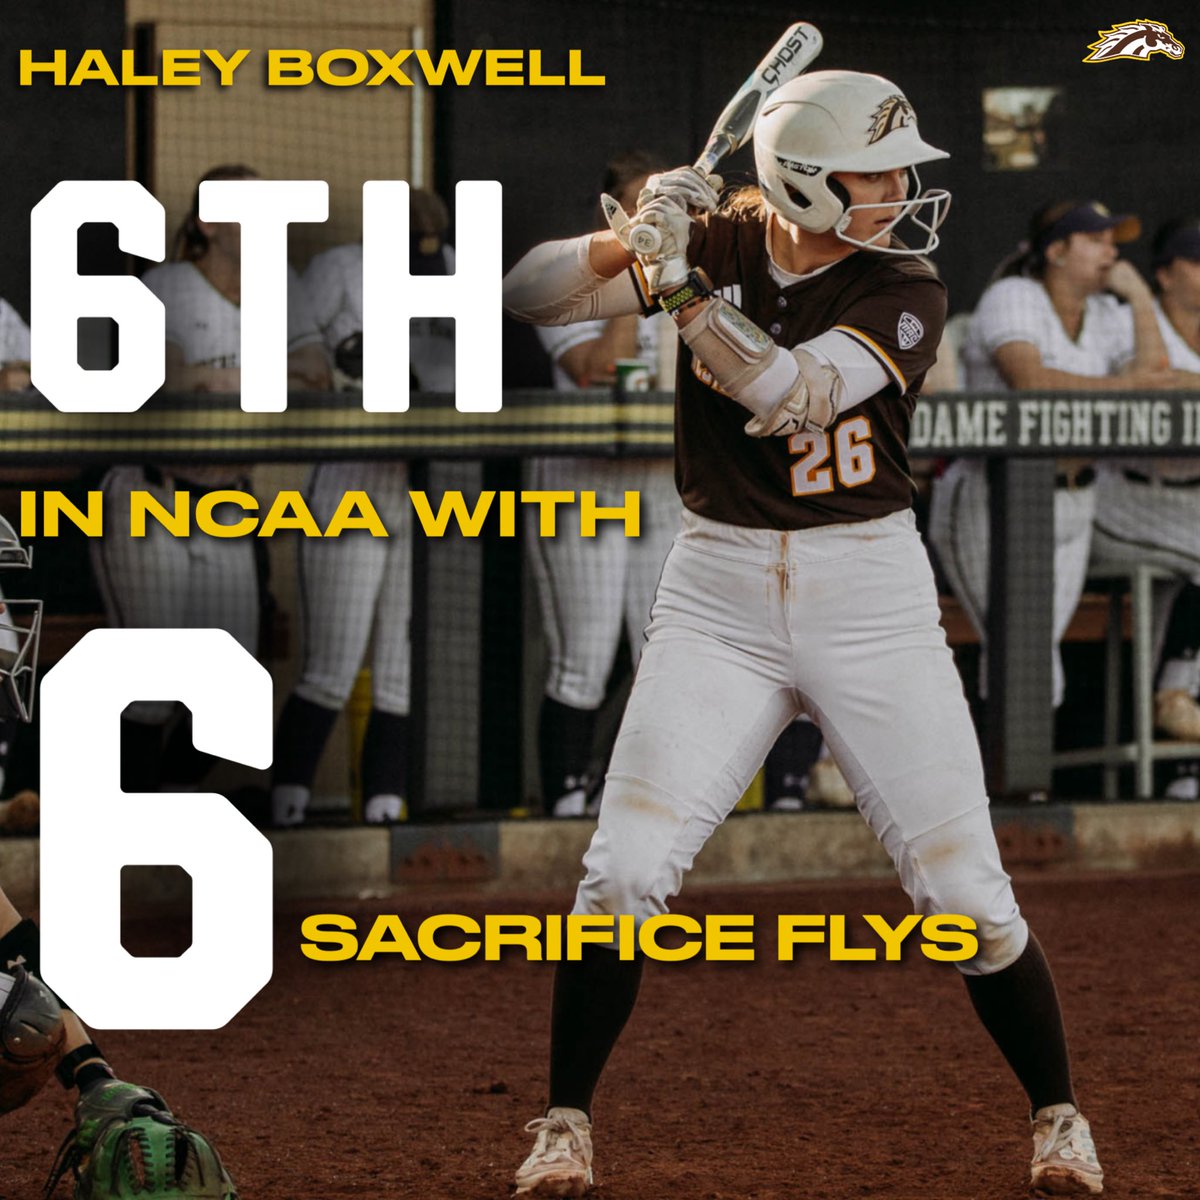 .@HaleyBoxwell leads us with 6 Sacrifice flys on the year!